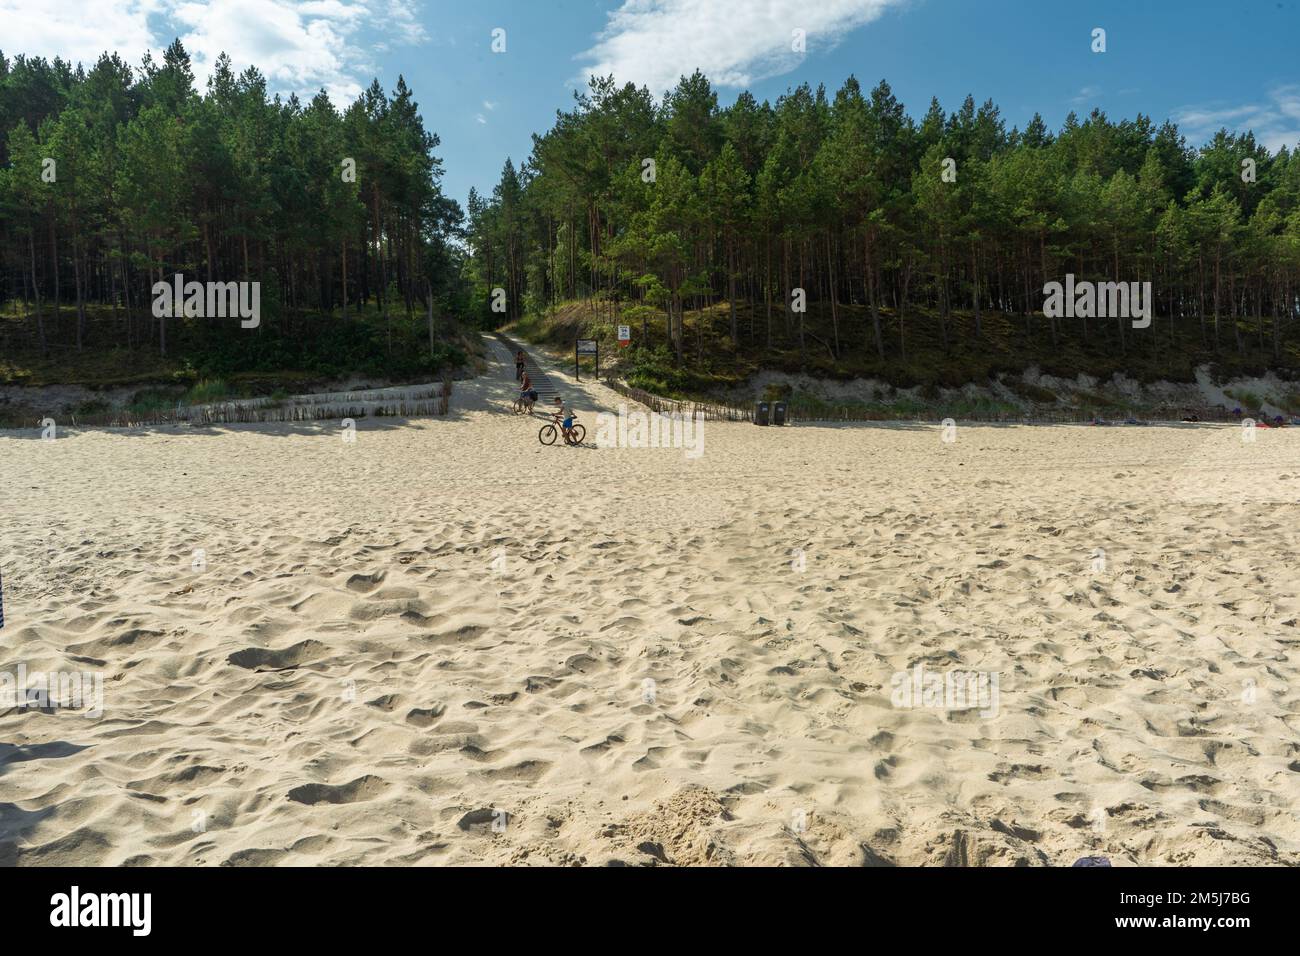 Katy Rybackie, Pomerania Poland 16 August. Entrence at the beach, view from seaside Stock Photo